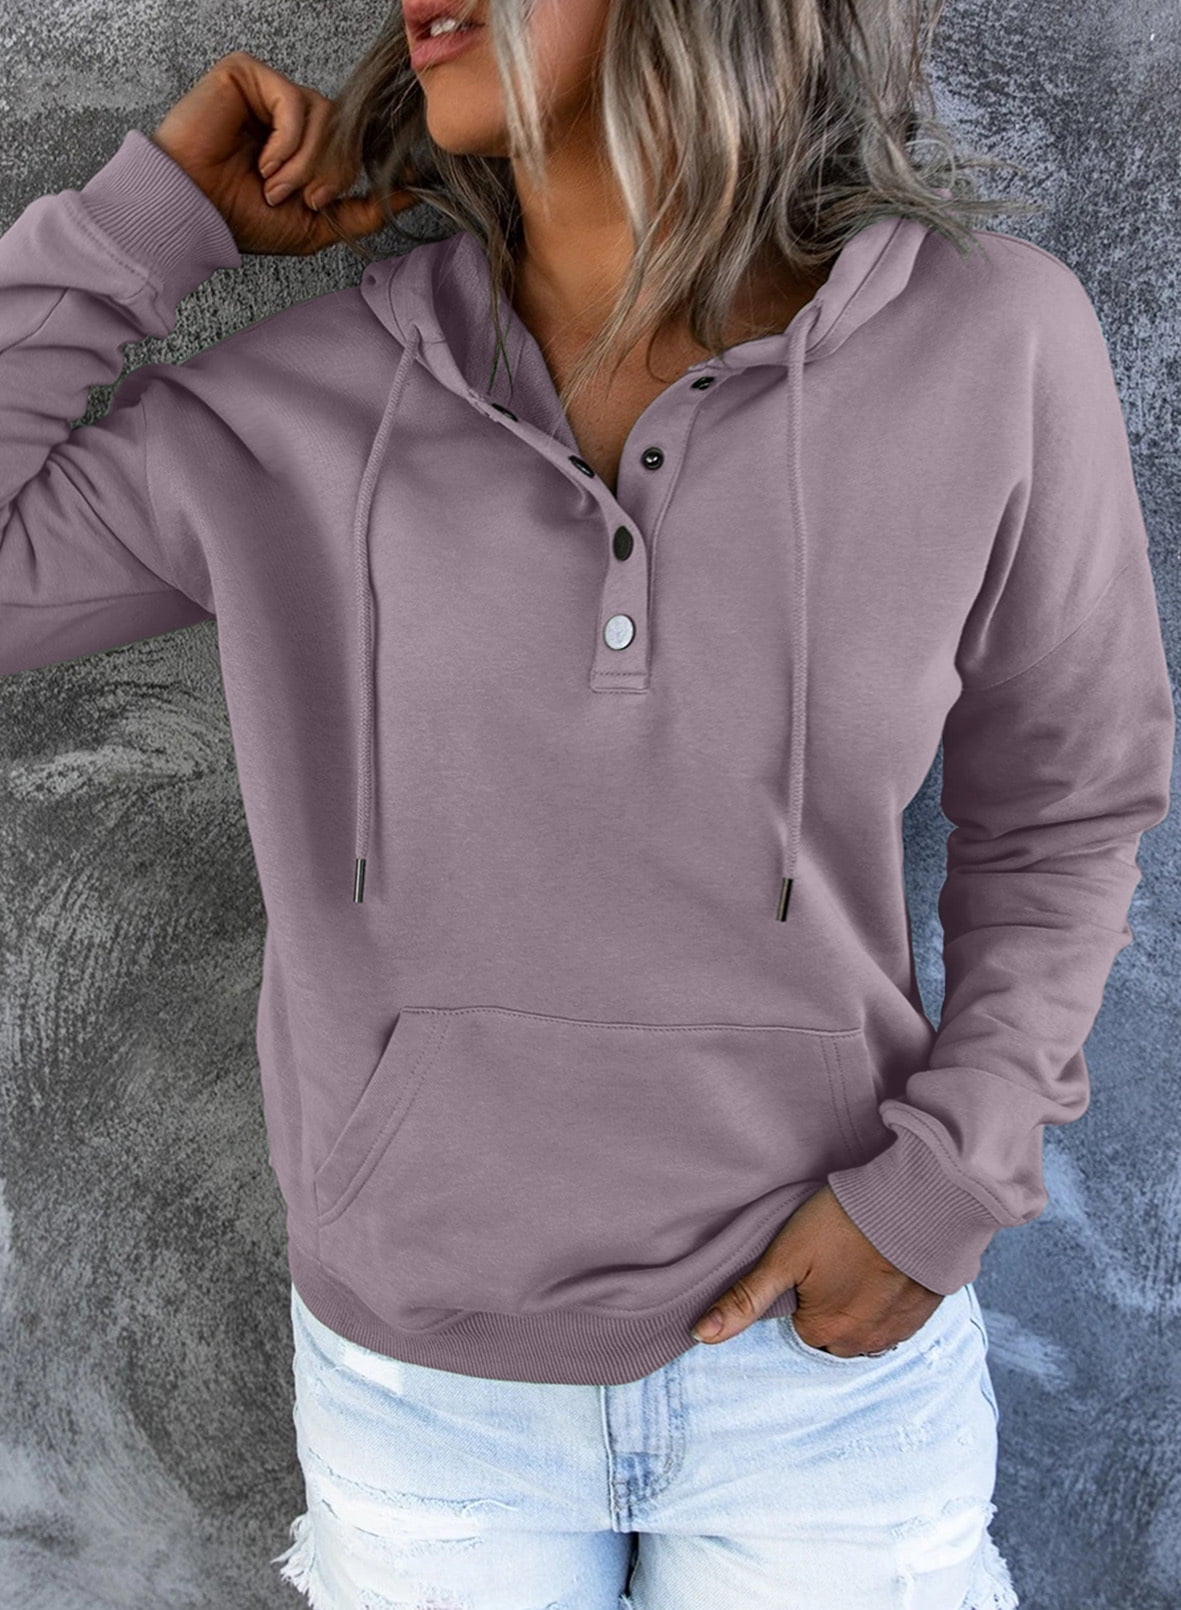 Blibea Women's Hoodie Sweatshirt Long Sleeve 1/4 Button Closure Drawstring Pullover Hooded Tops - image 2 of 8